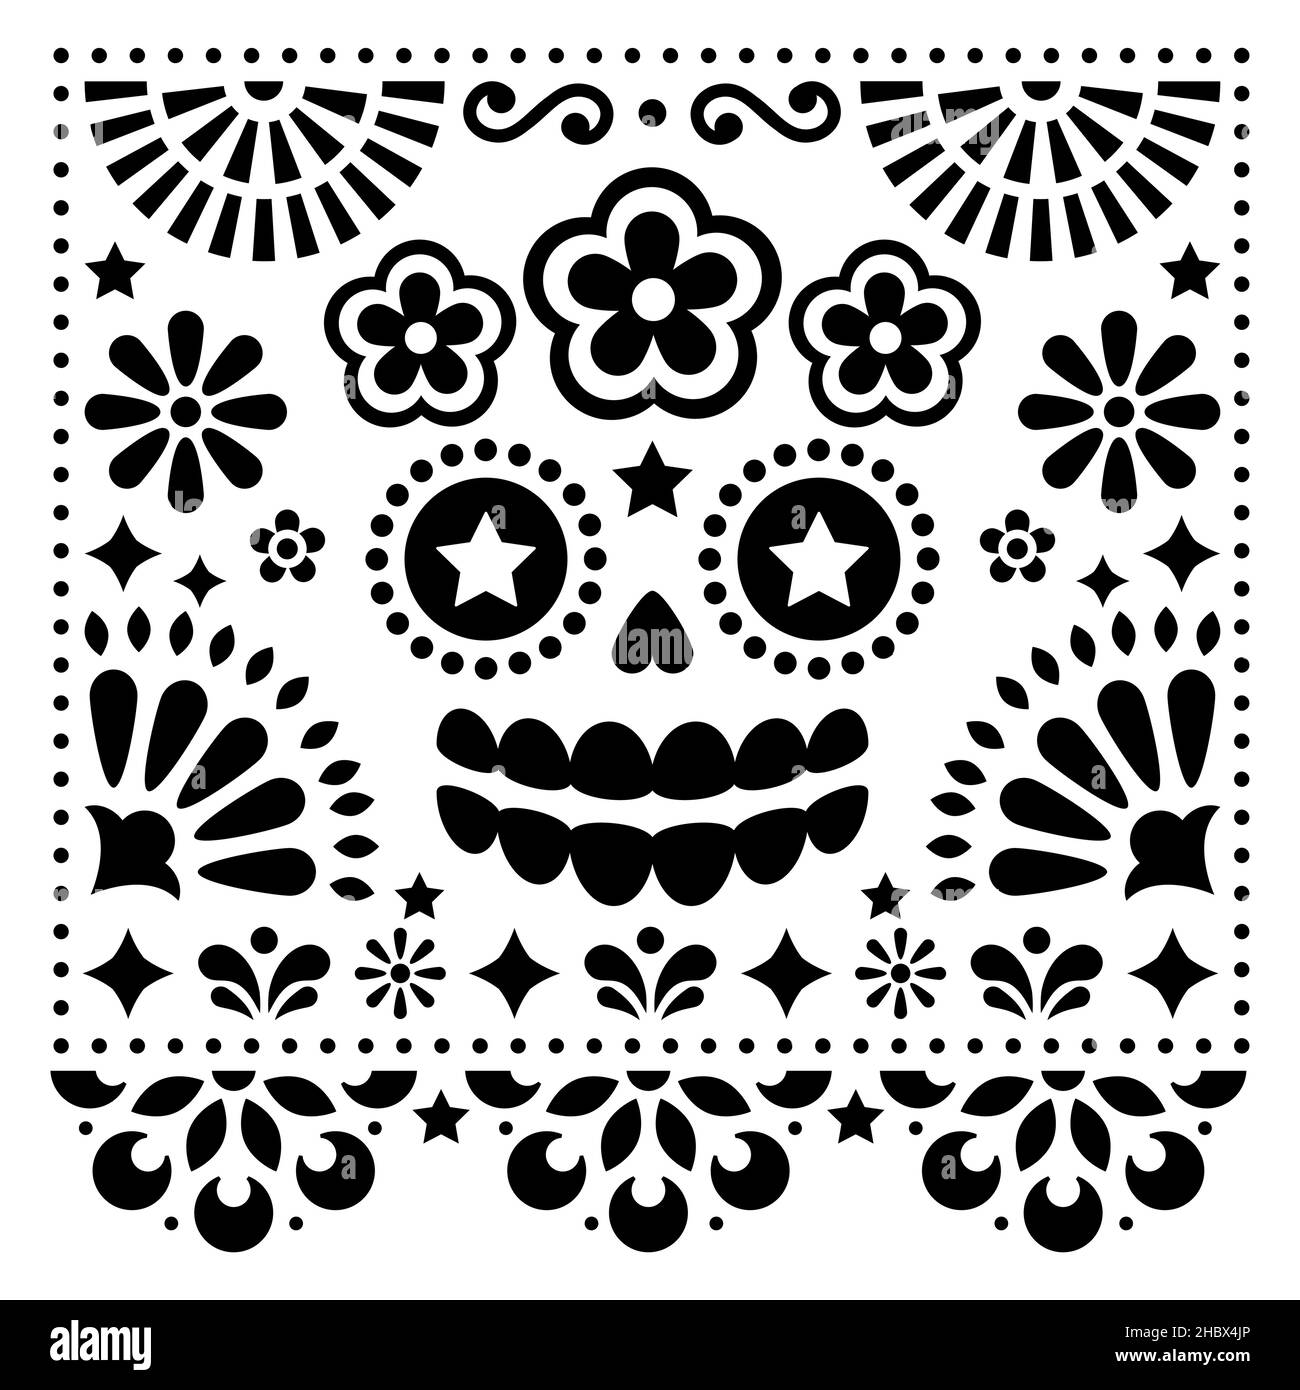 Mexican folk art vector folk art design with sugar skull and flowers, Halloween and Day of the Dead black pattern on white background - greeting card Stock Vector